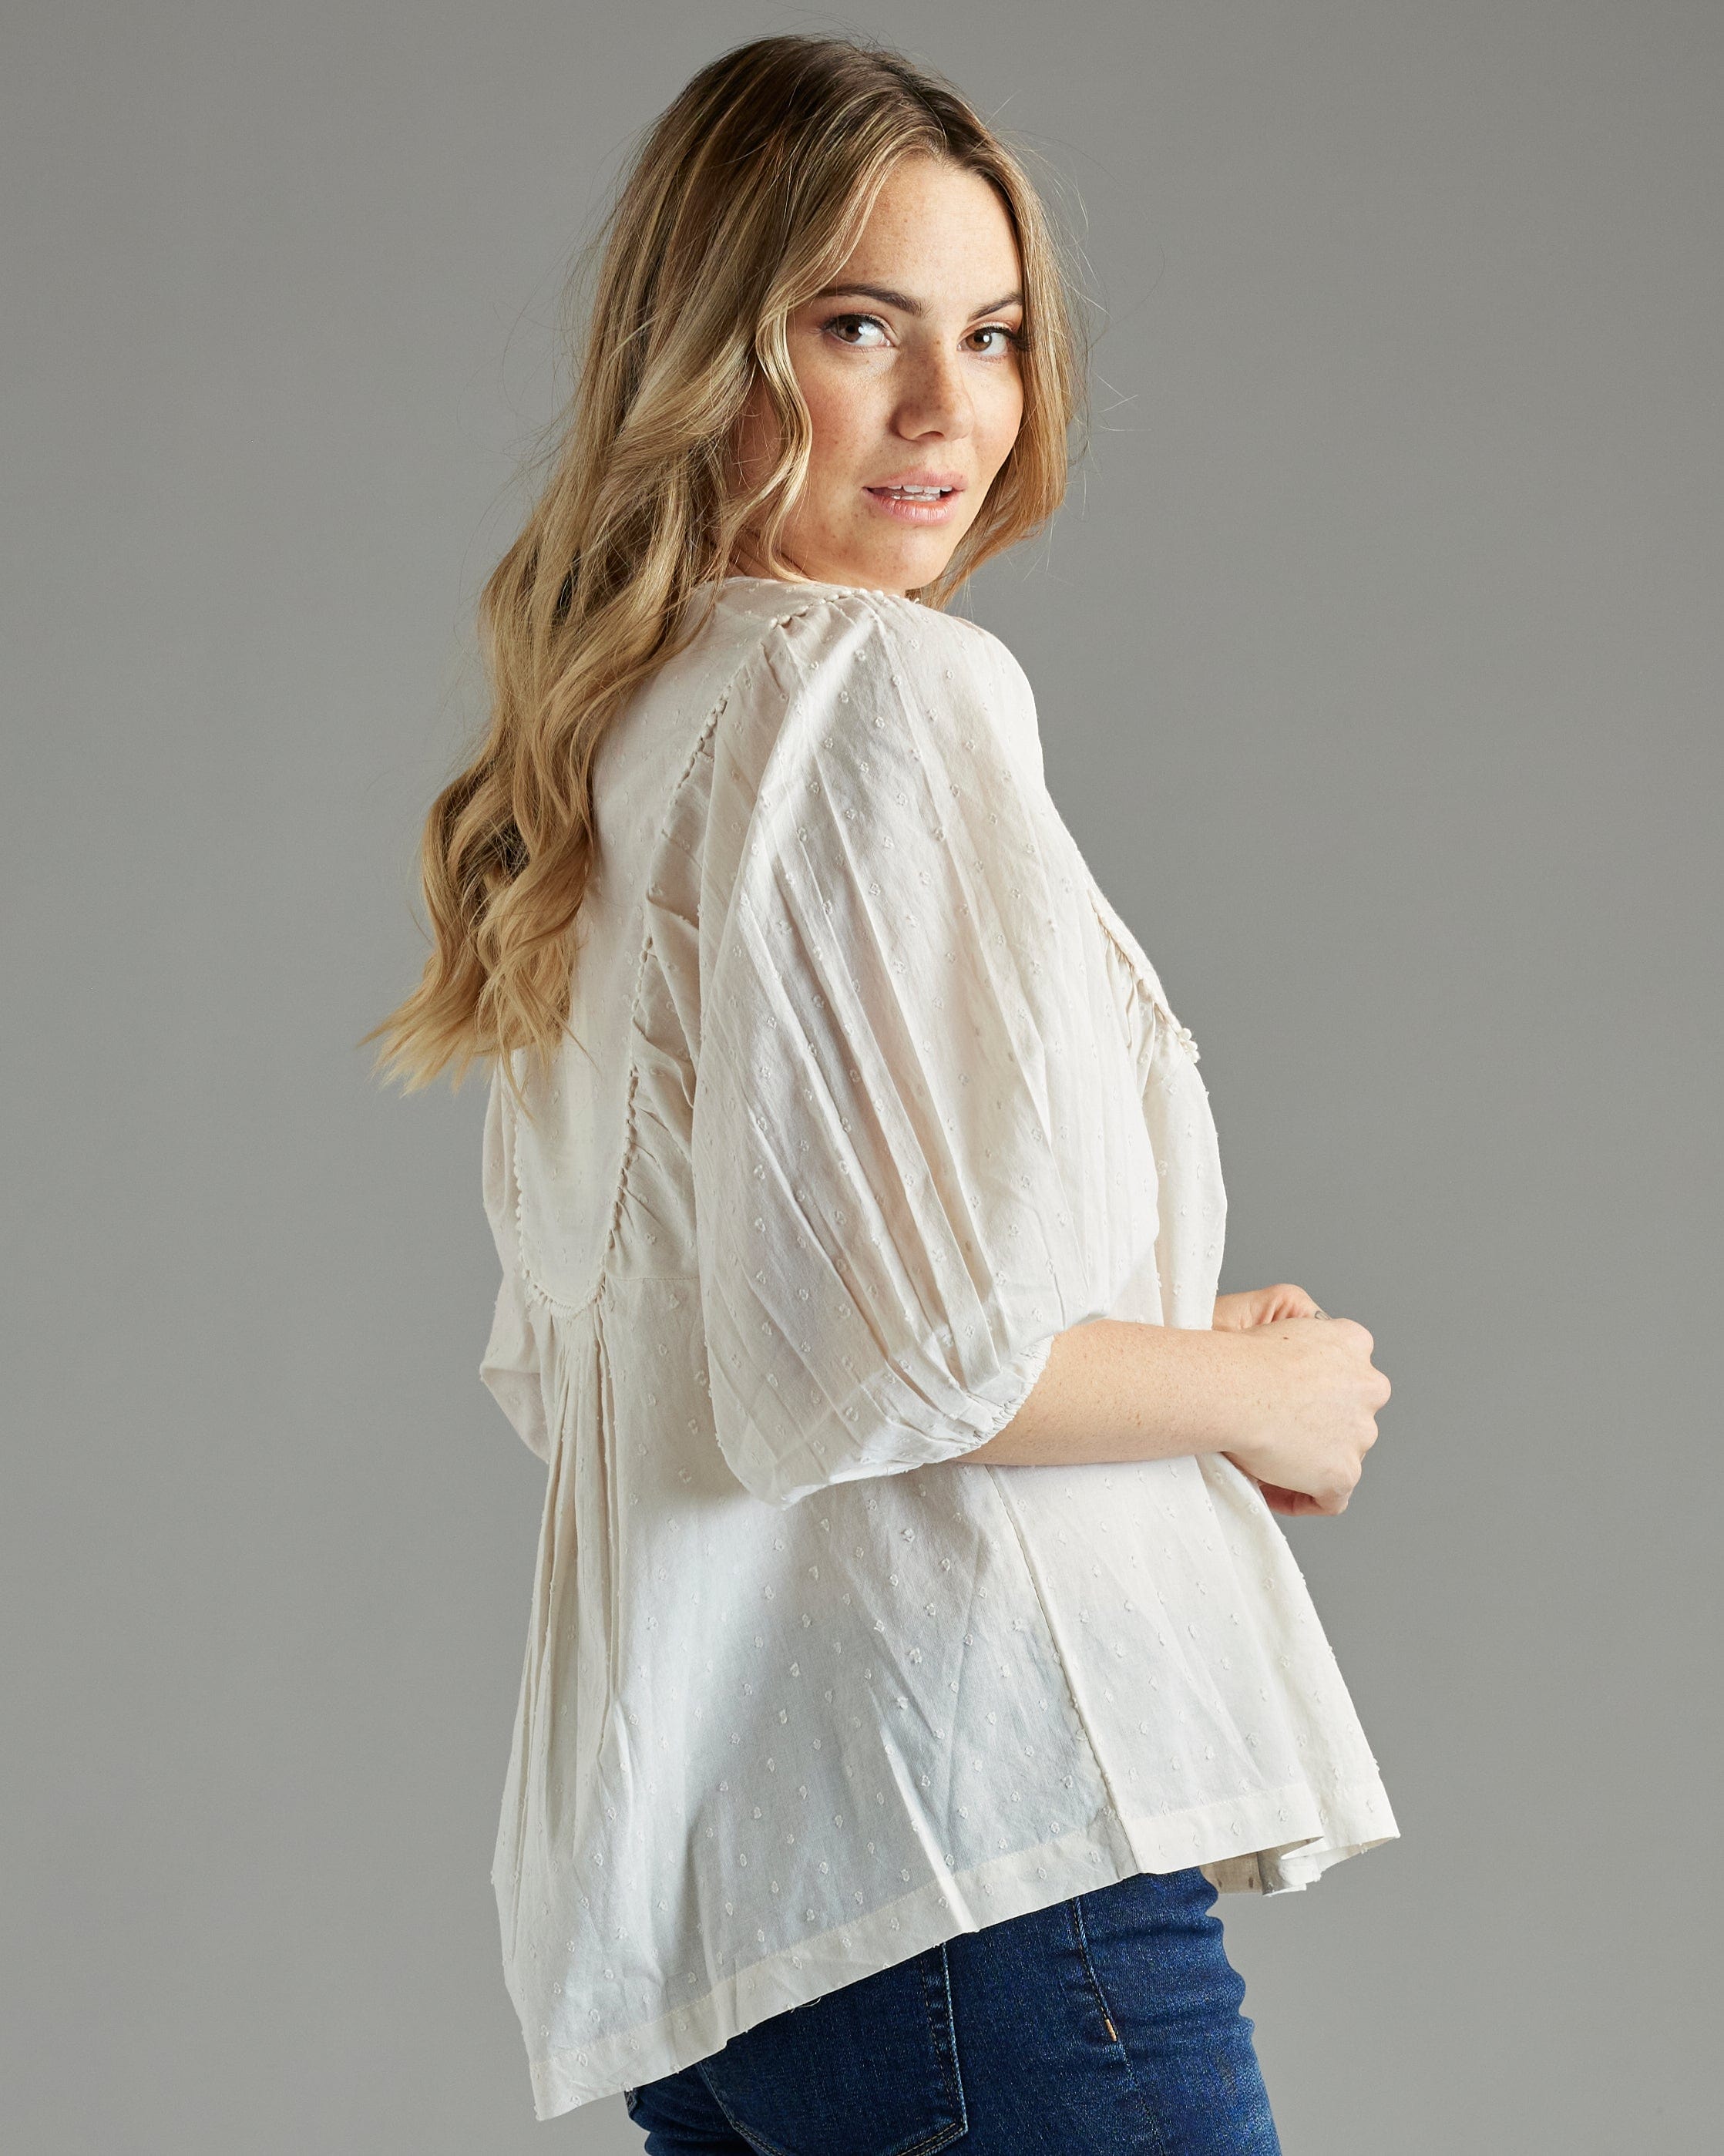 Woman in a white blouse with 3/4 length sleeves and embroidery on bib